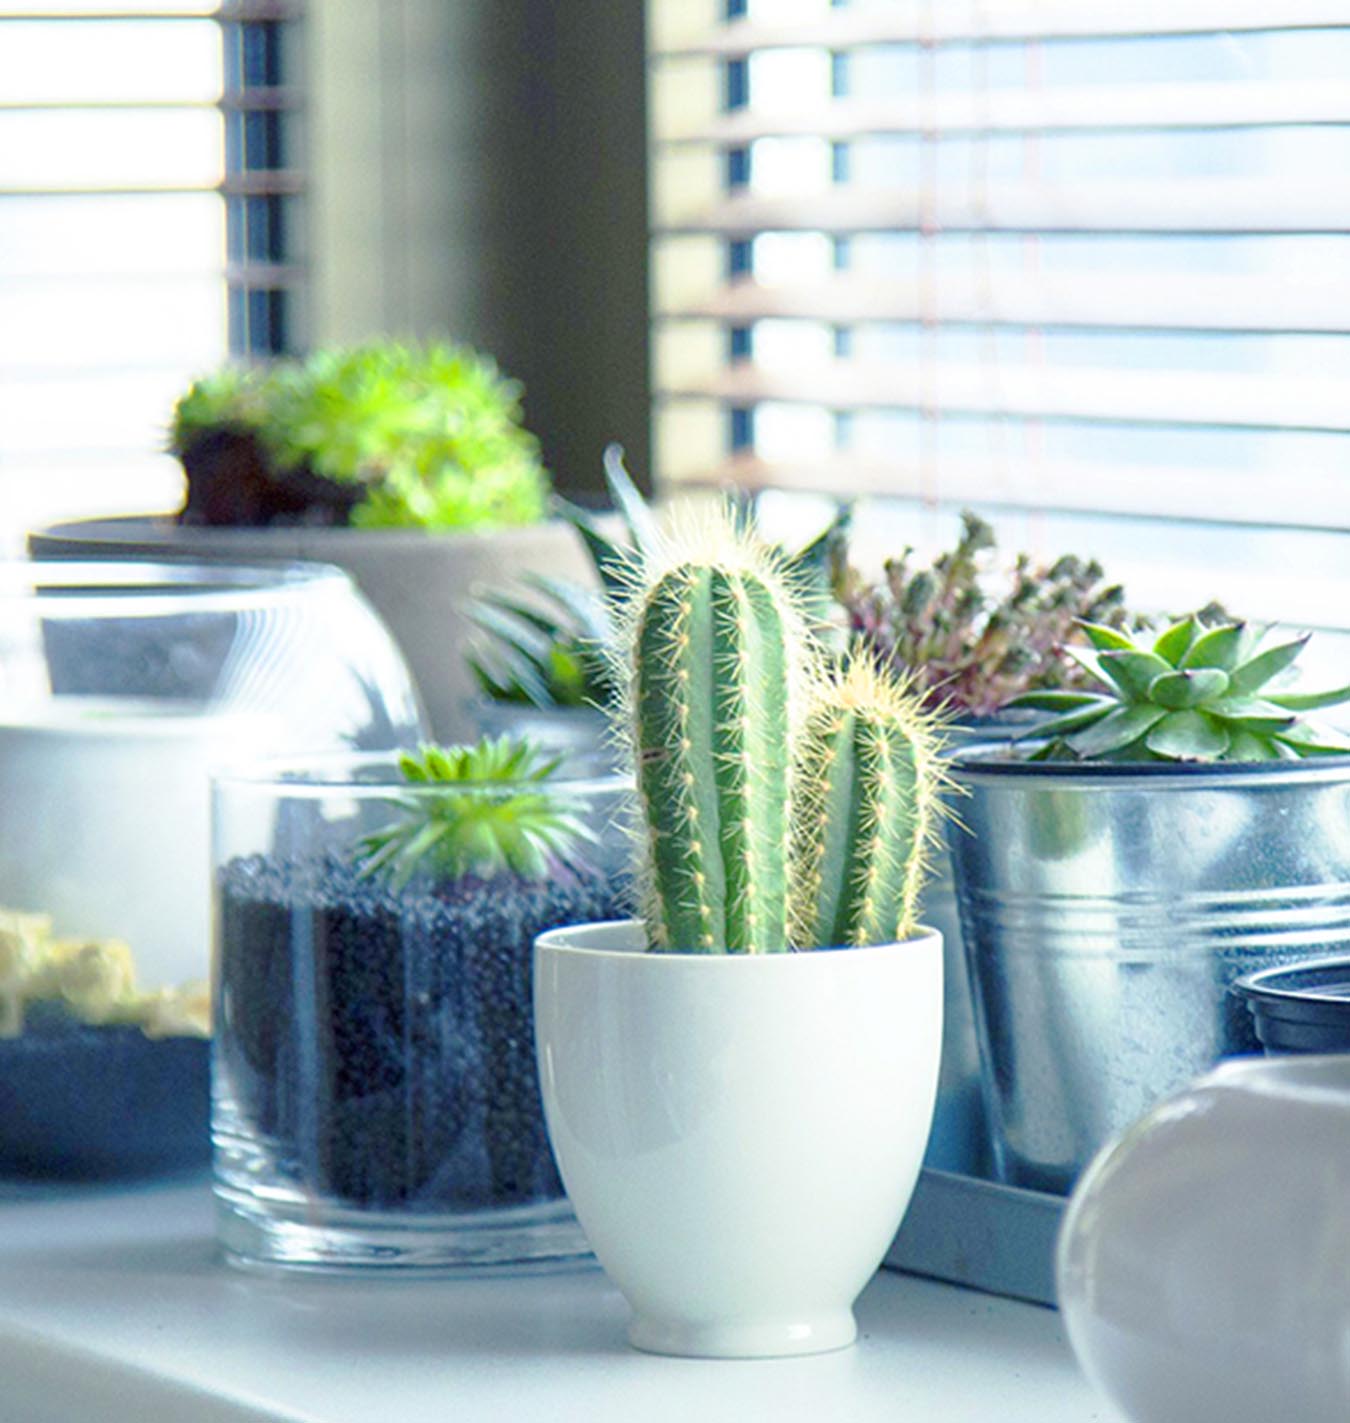 Cactus and succulents sitting on a counter